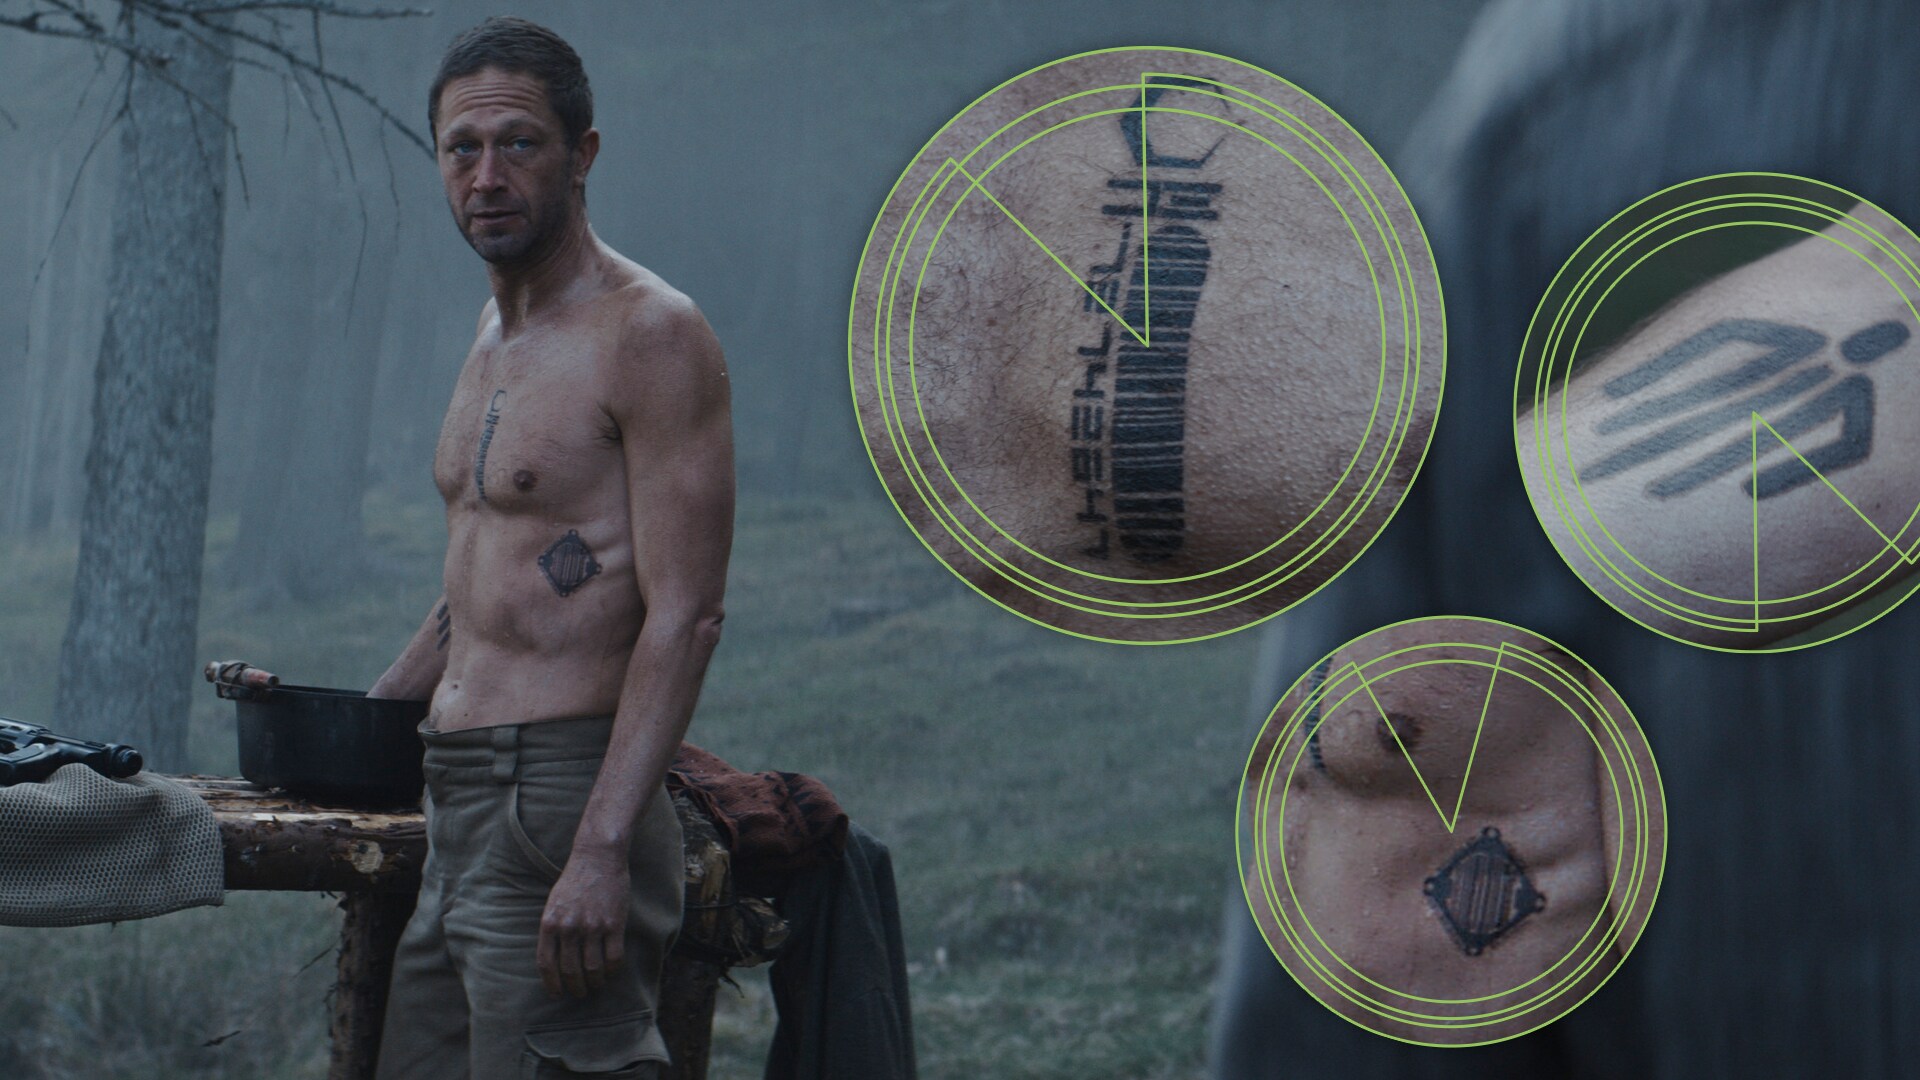 Skeen’s tattoos include Krayt’s Head, with “KH” in aurebesh, and his prison number 72742647 liste...